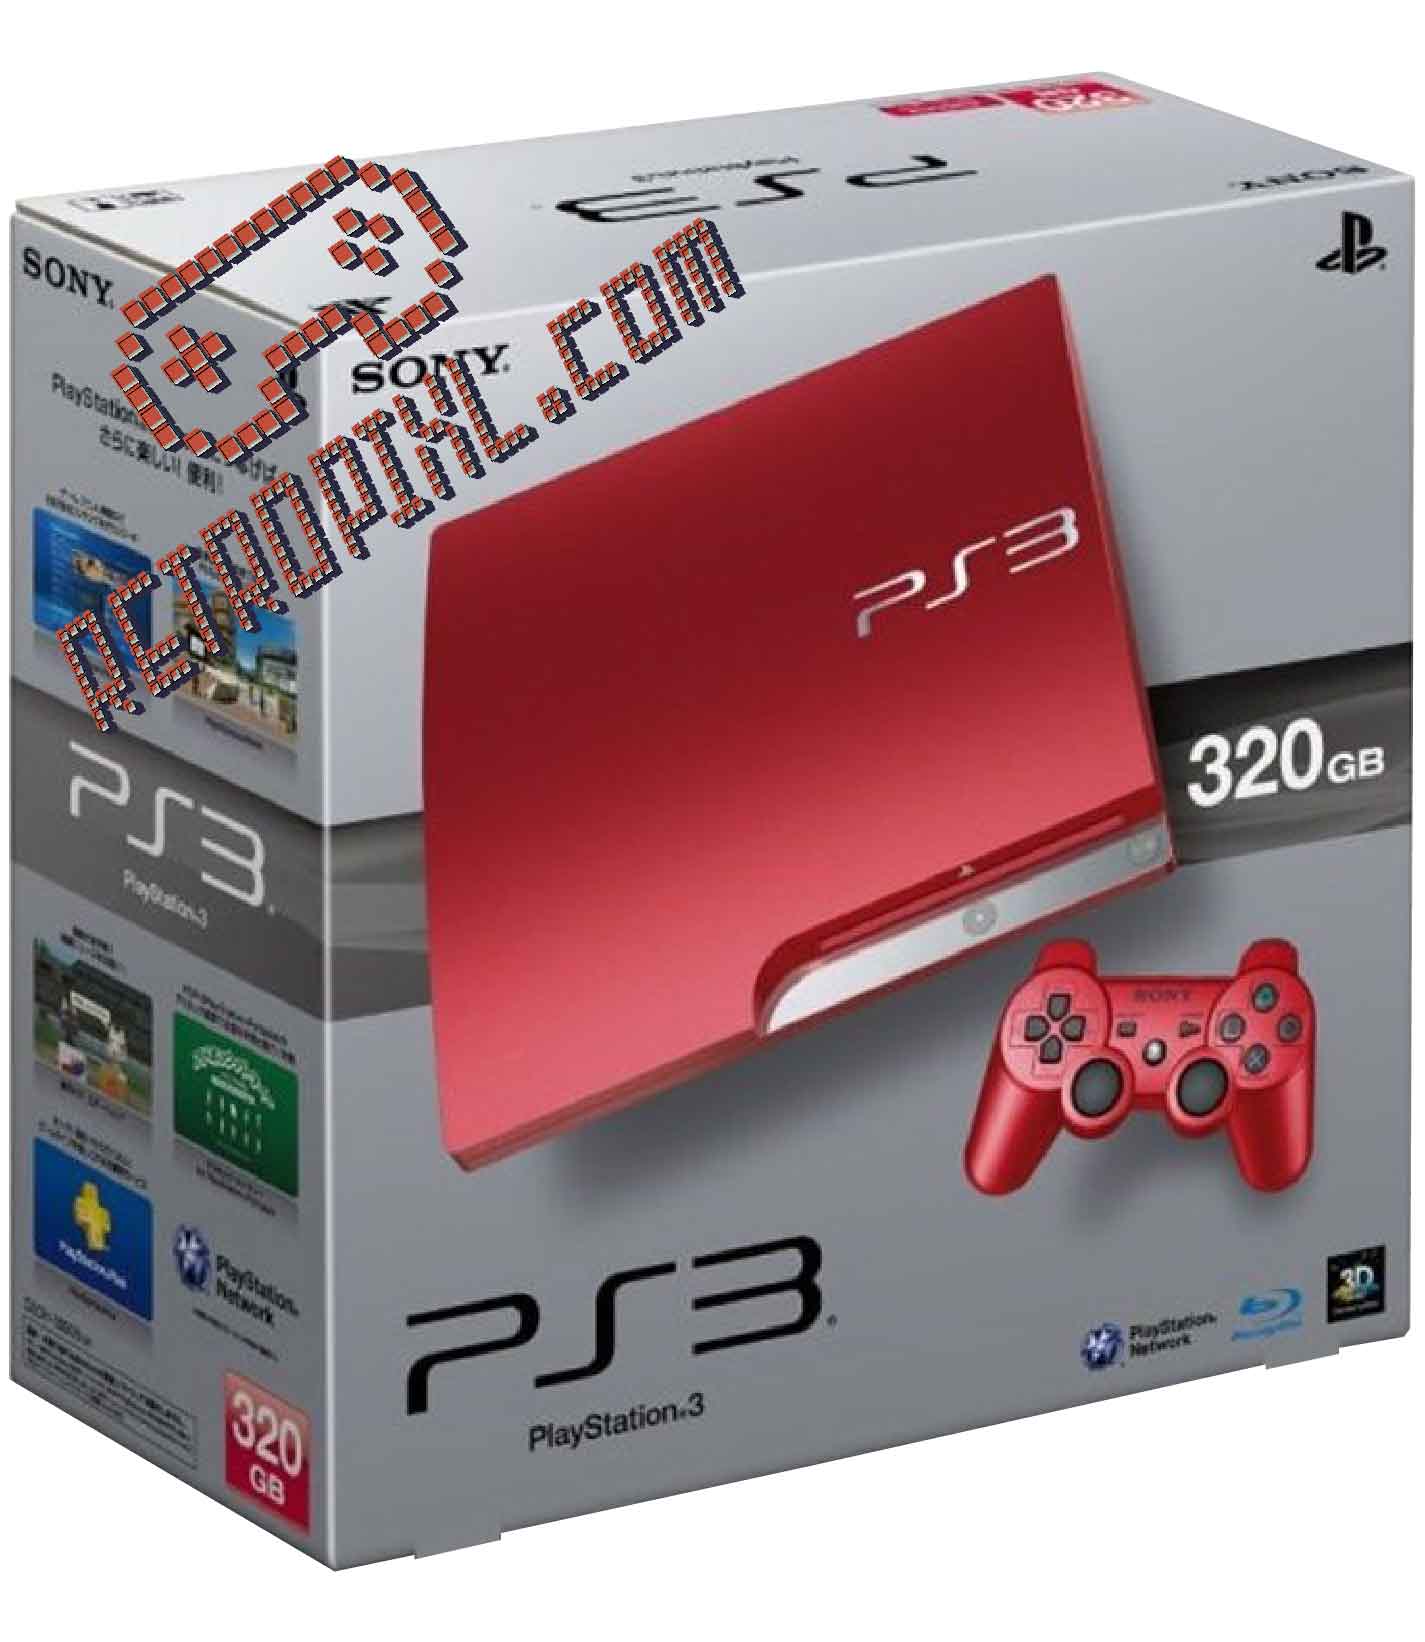 scarlet red ps3